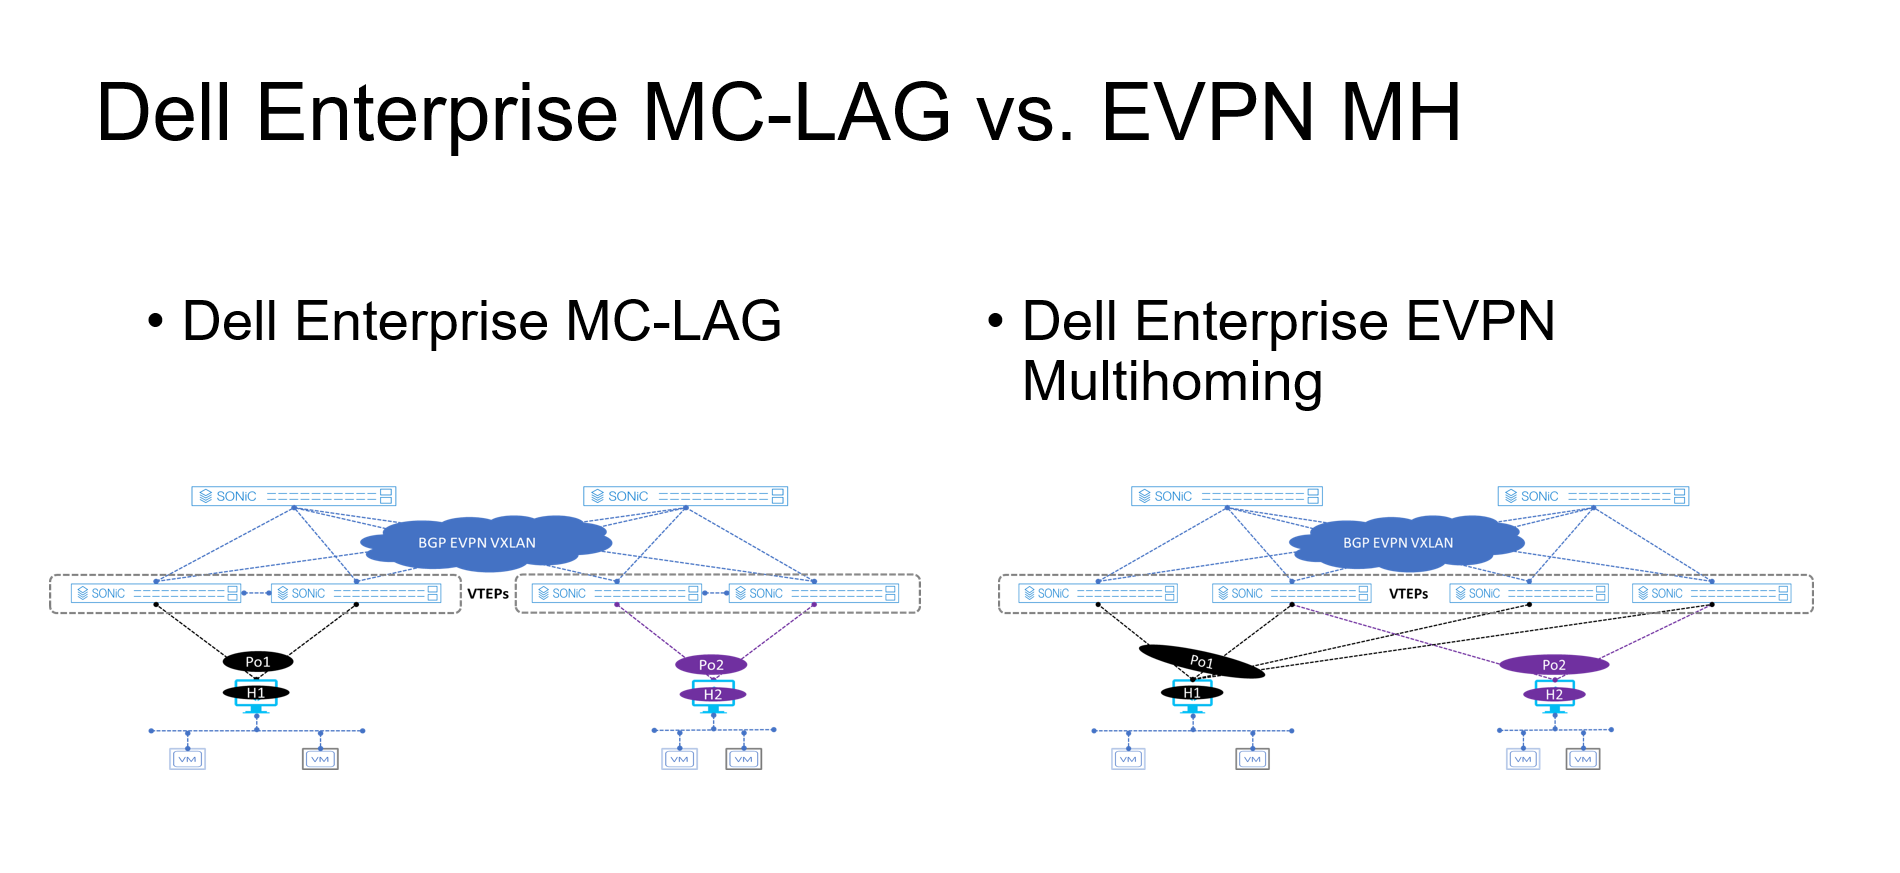 Figure 2 compares MC-LAG and EVPN multihoming deployment